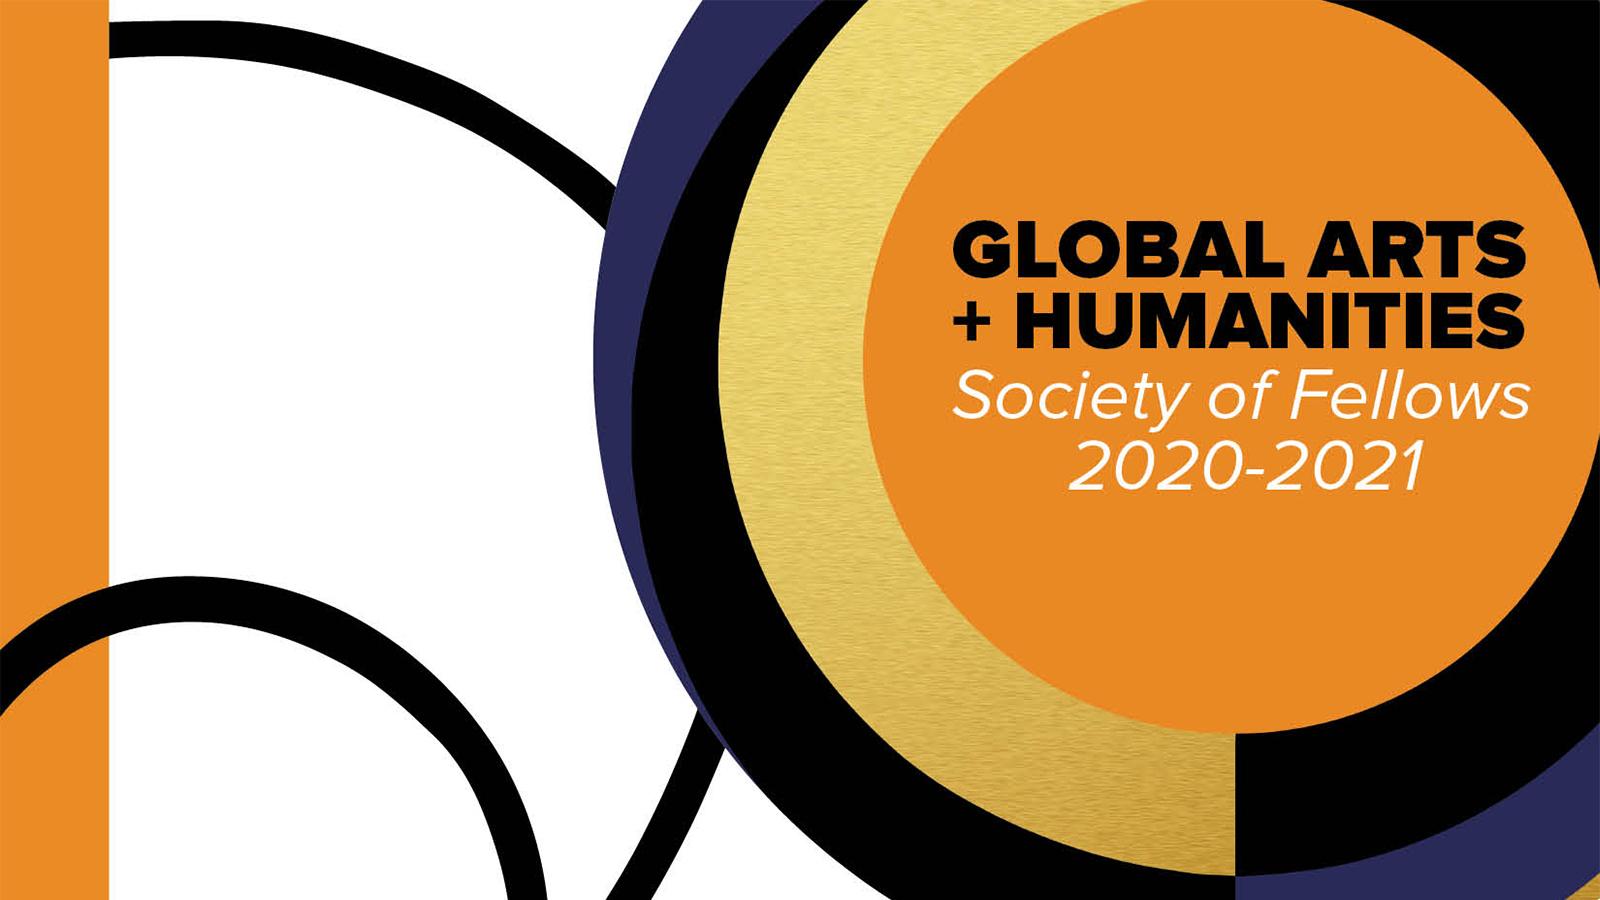 Global Arts and Humanities: Society of Fellows 2020-2021